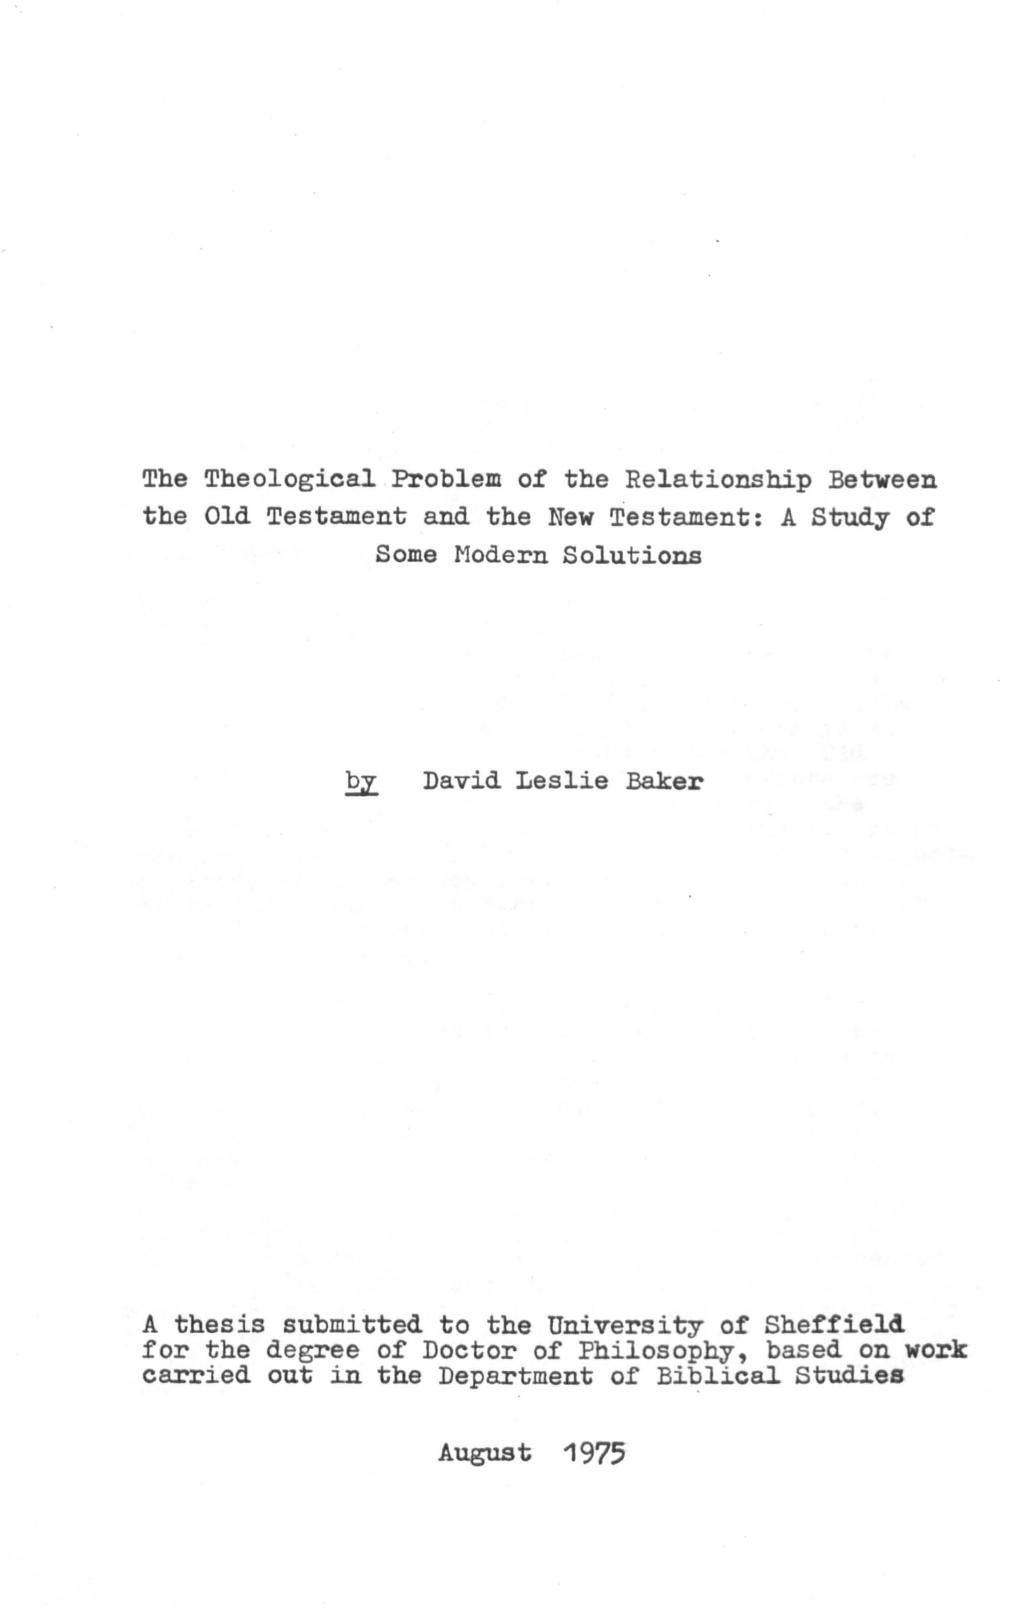 The Theological Problem of the Relationship Between the Old Testament & the New Testament A Study of Some Modern Solutions, PhD Thesis, 1975